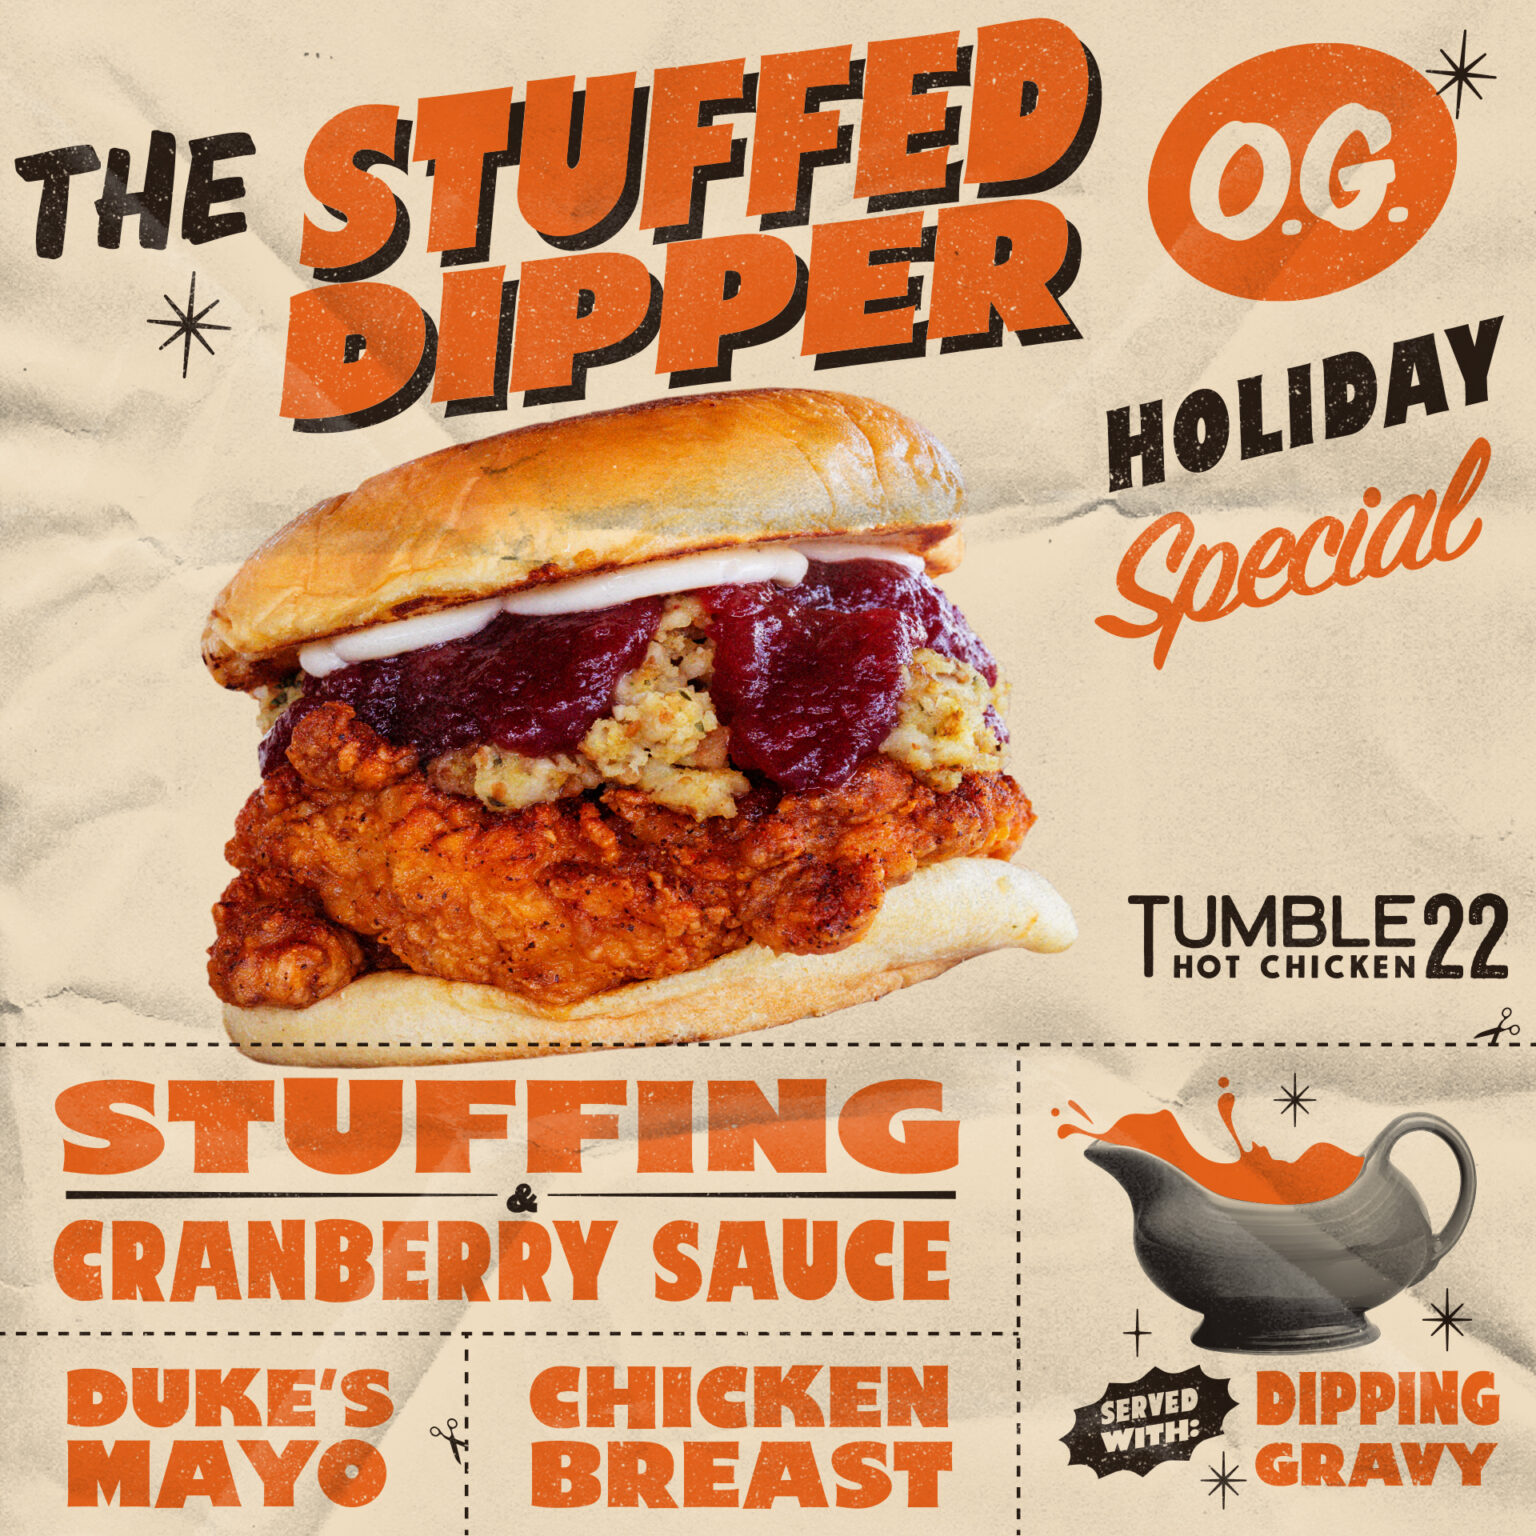 The Stuffed Dipper O.G. - Tumble 22 Holiday Special